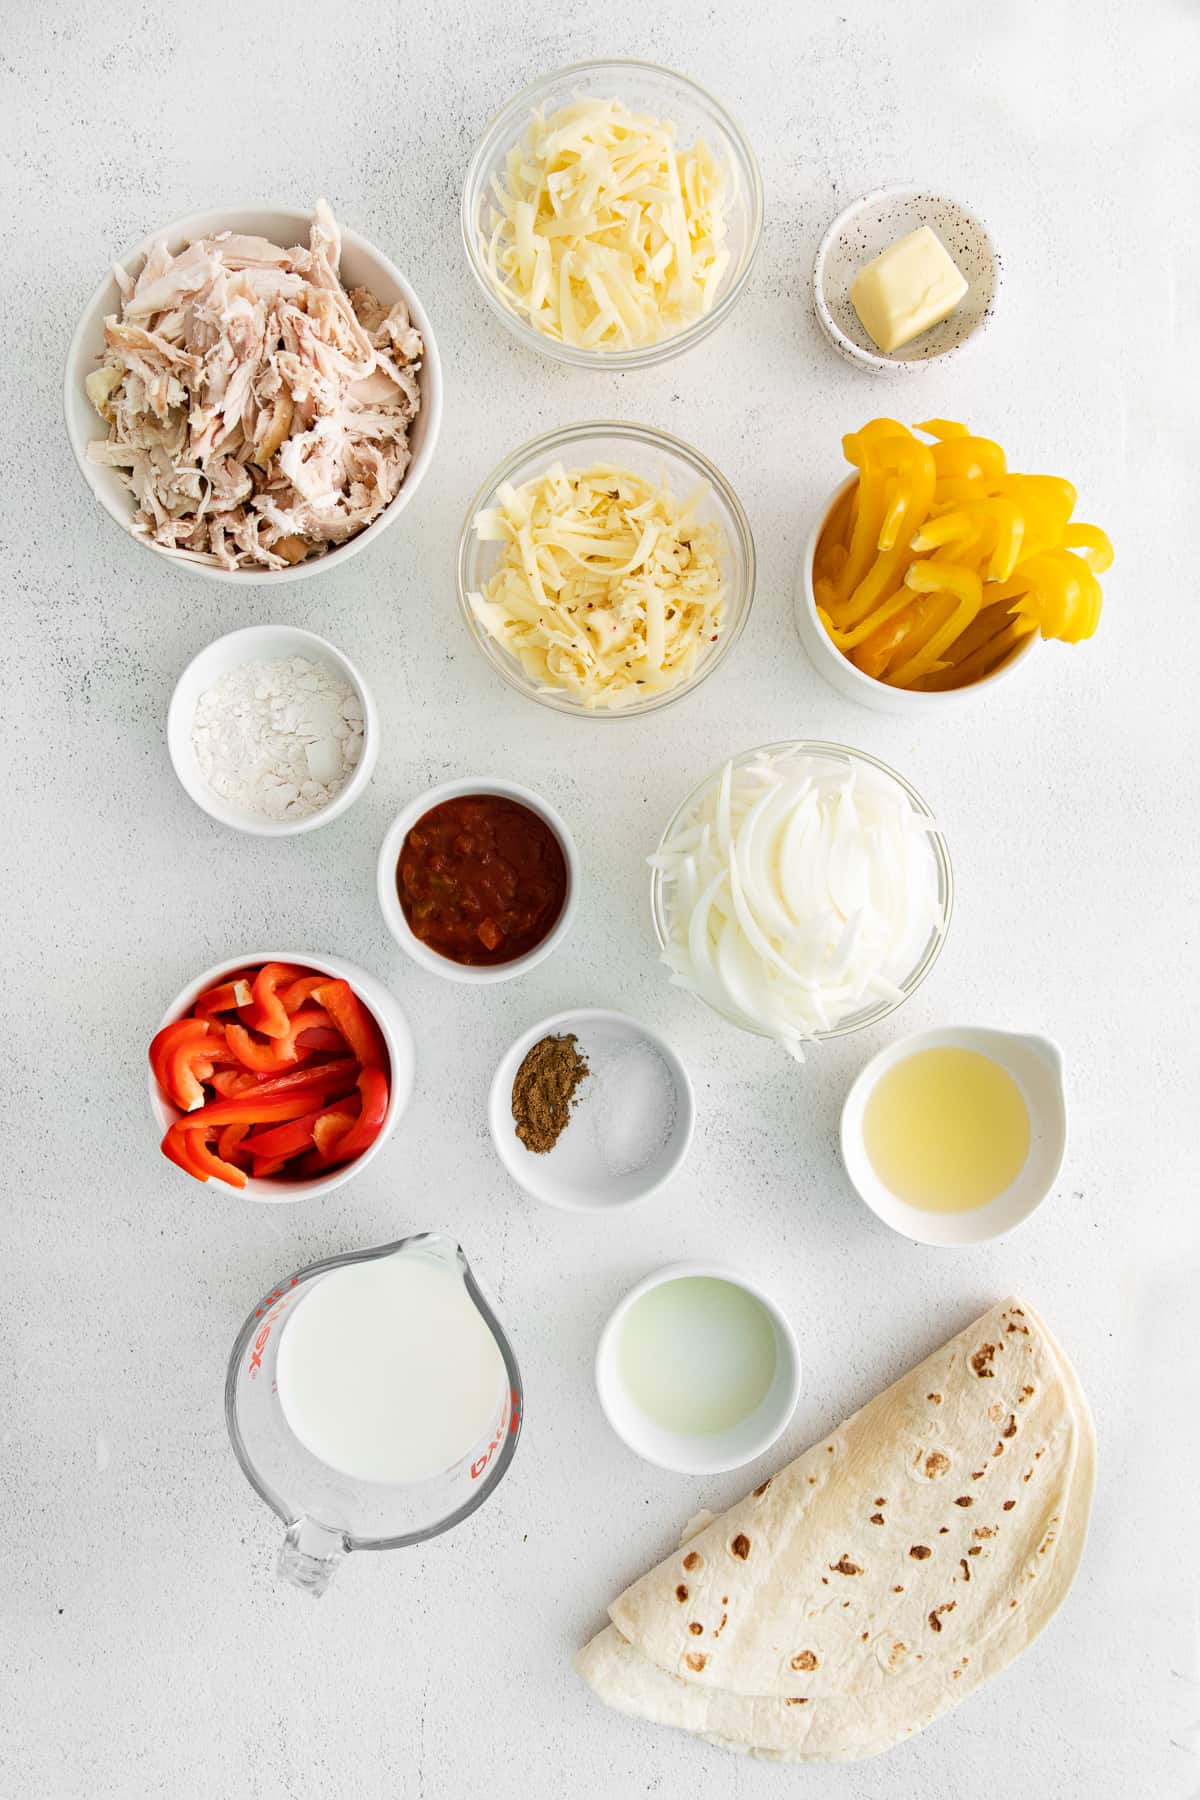 Ingredients for chicken quesadillas in bowls.